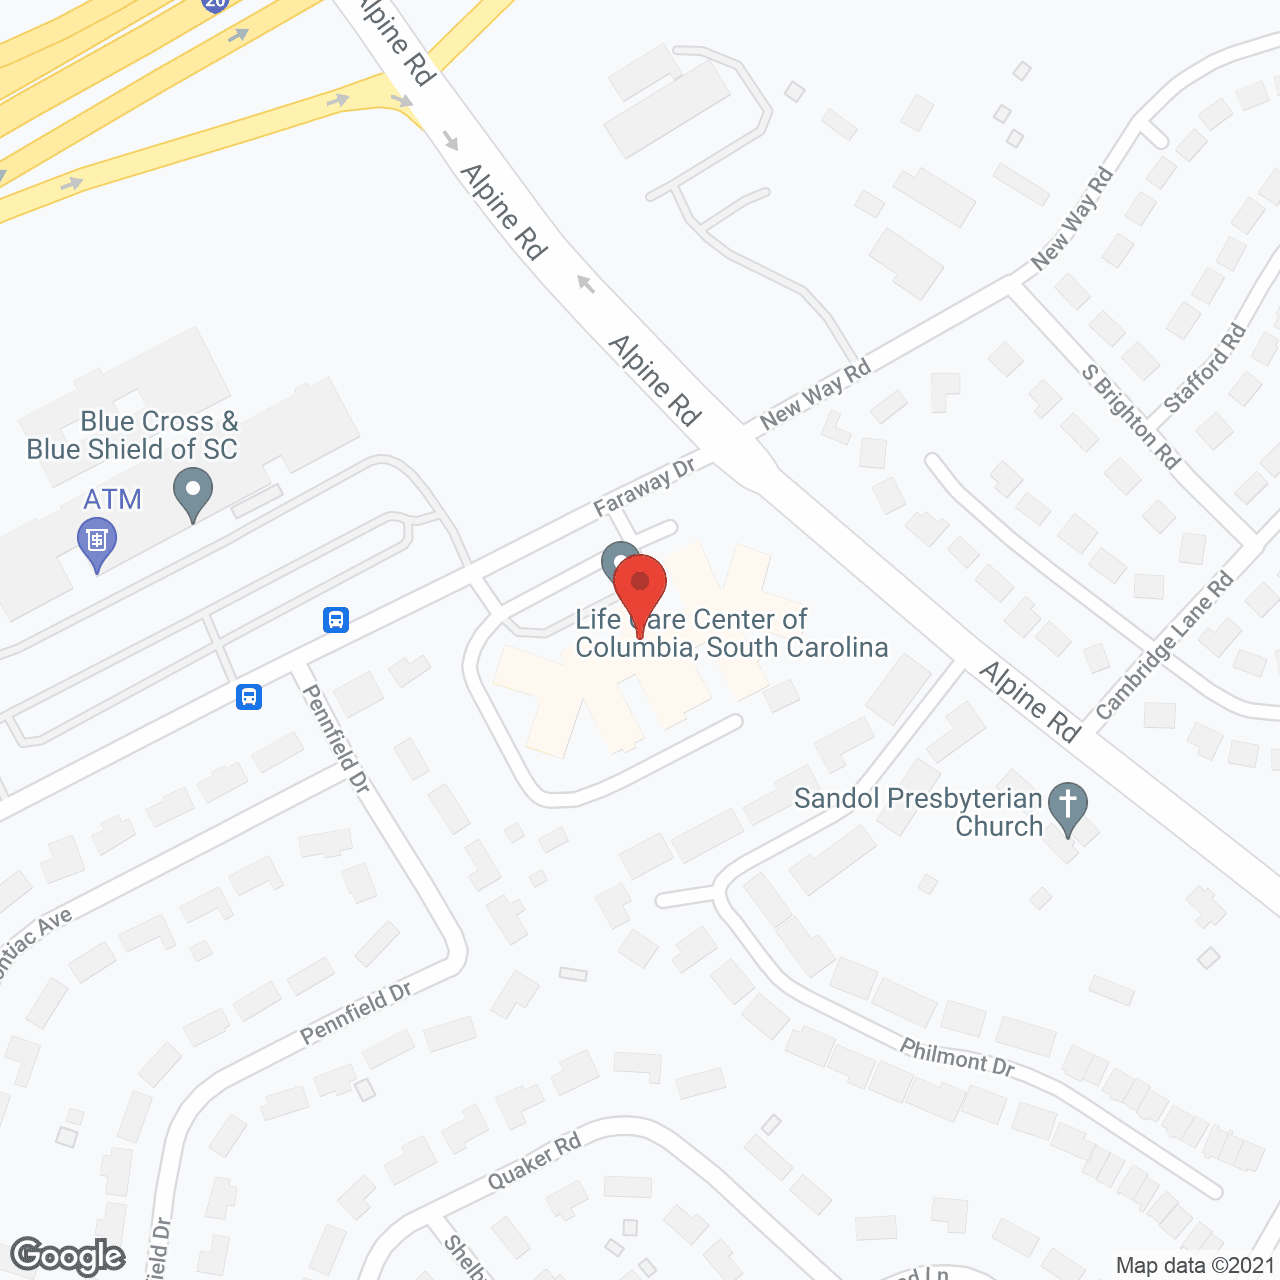 Life Care Ctr of Columbia in google map